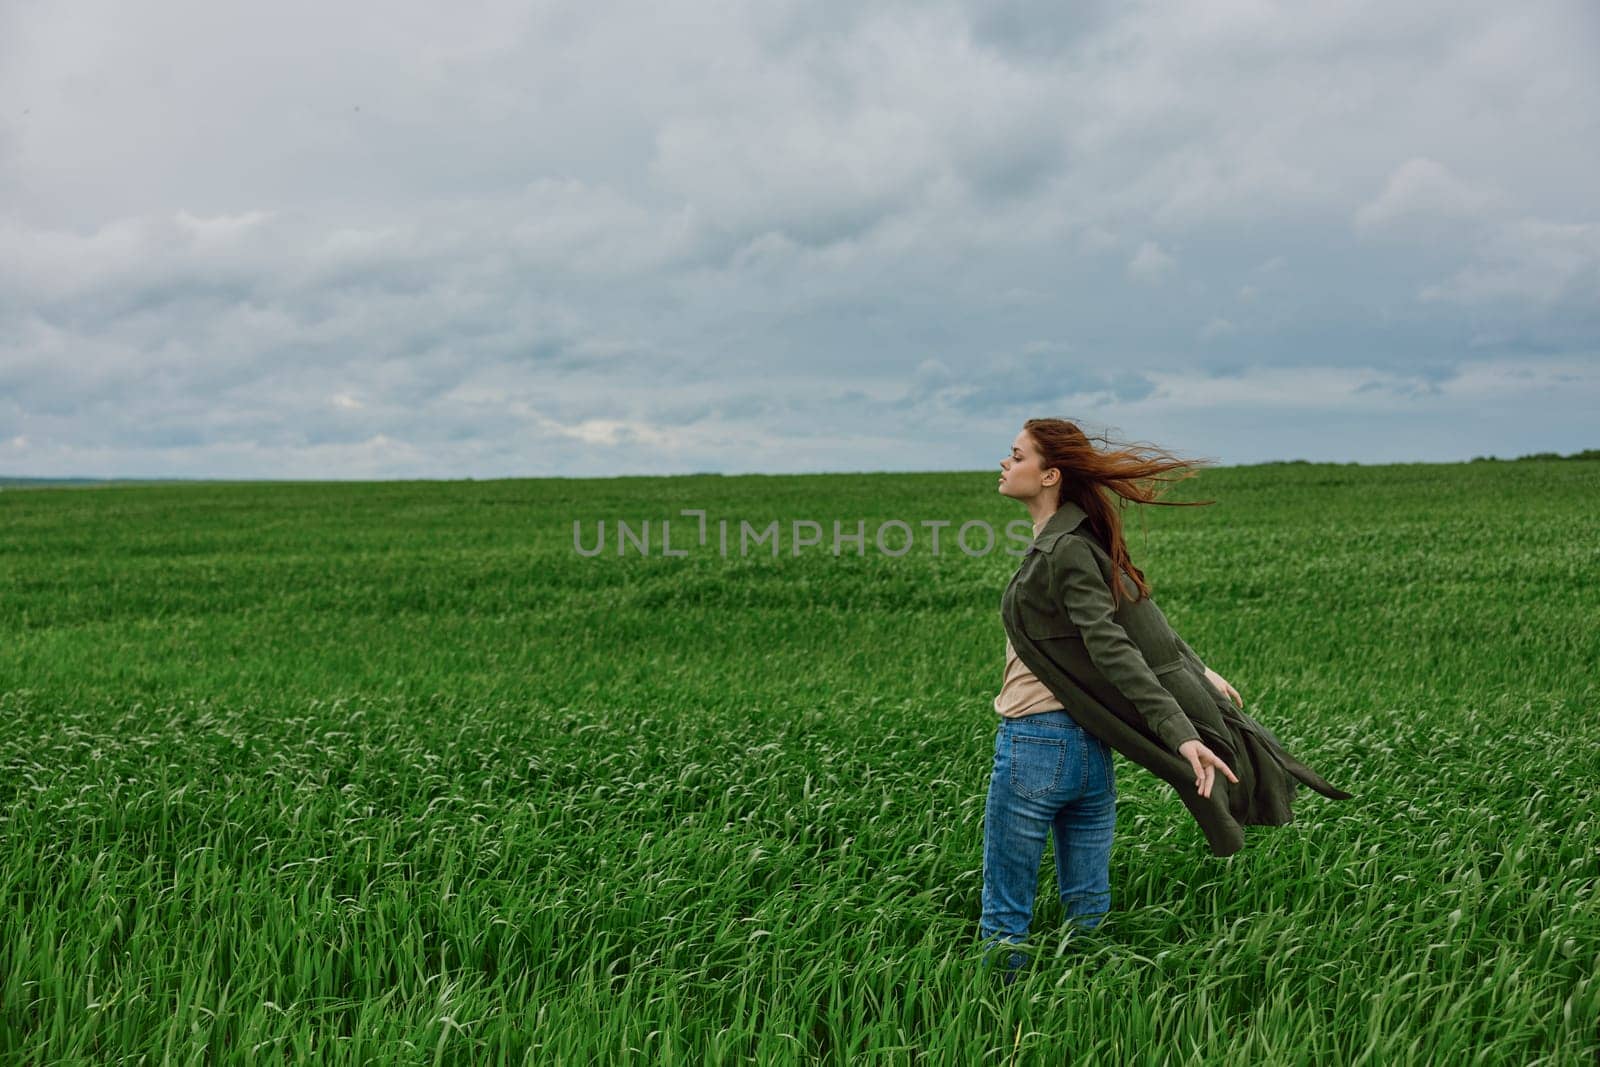 a woman in a long coat stands in tall green grass in a field, in cloudy weather, enjoying nature and the view. High quality photo